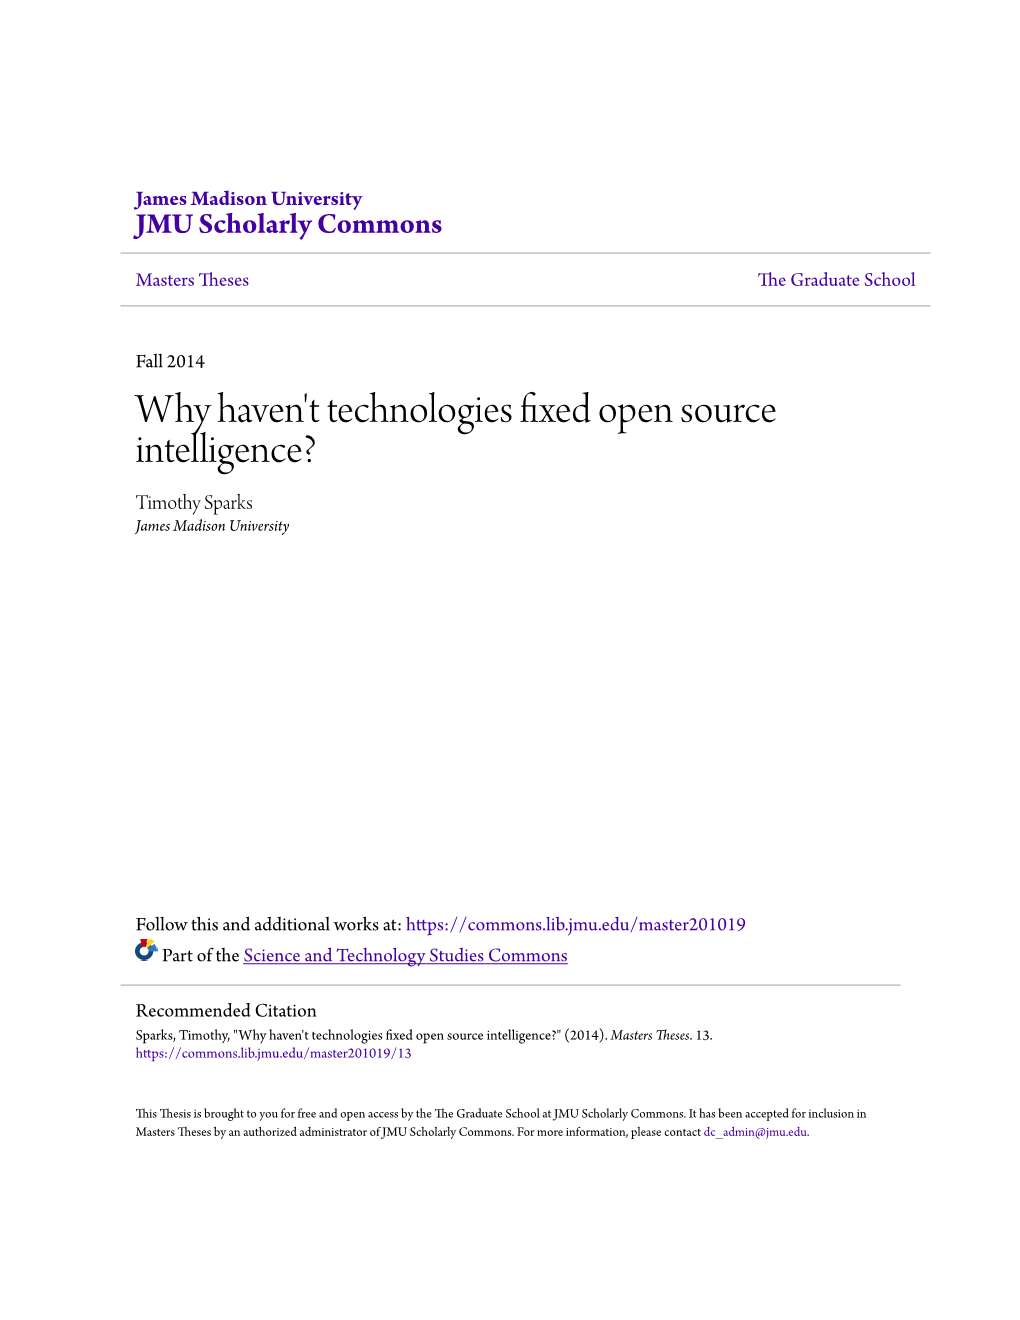 Open Source Intelligence (OSINT) Due to the Changing Nature of the Global Threat